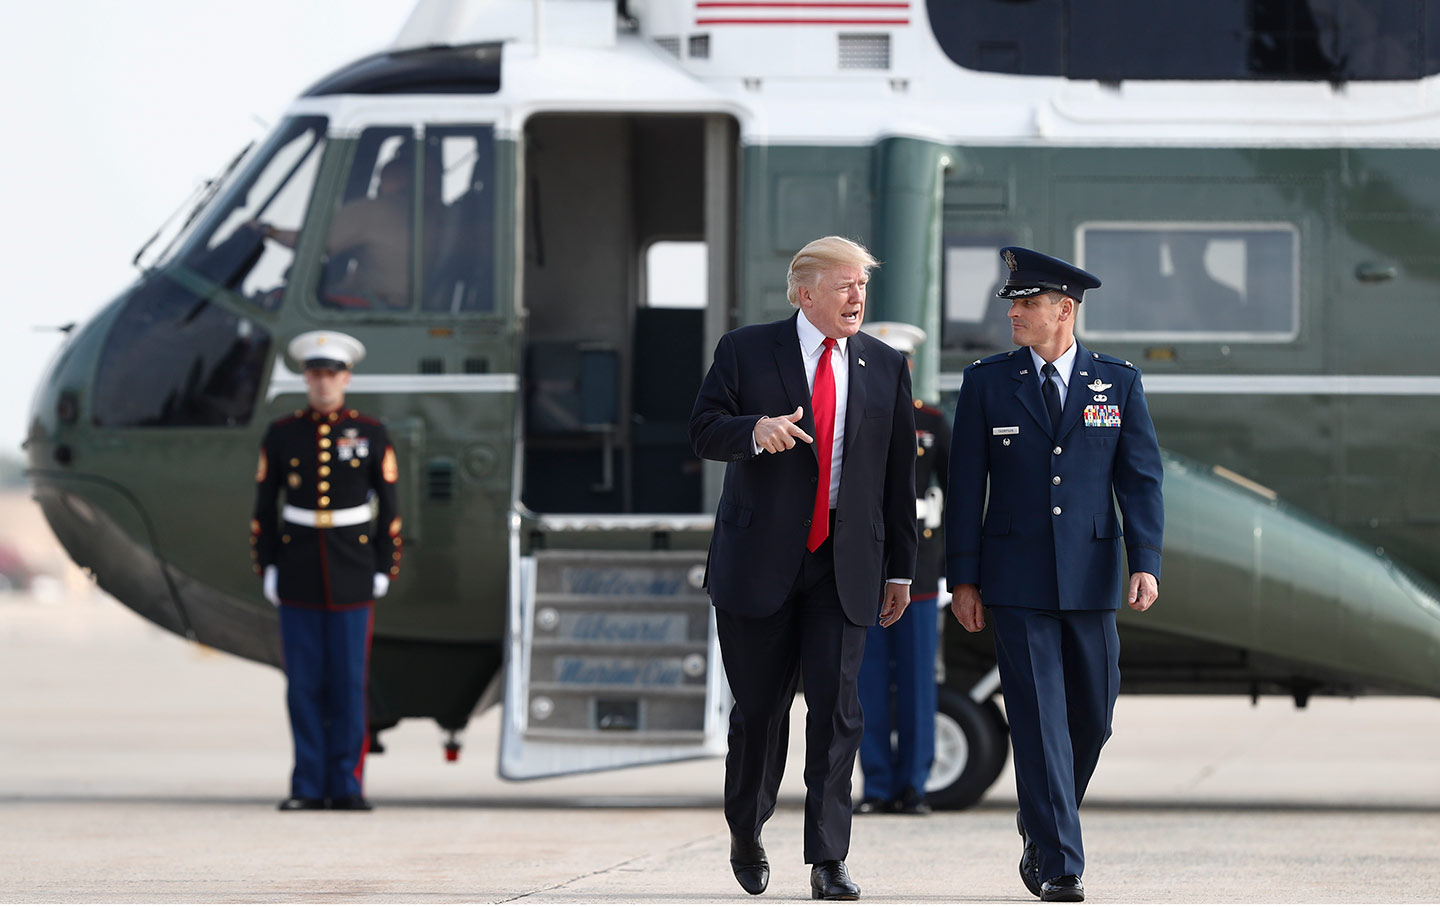 President Donald Trump walks from Marine One in Andrews Air Force Base, Maryland on July 22, 2017.